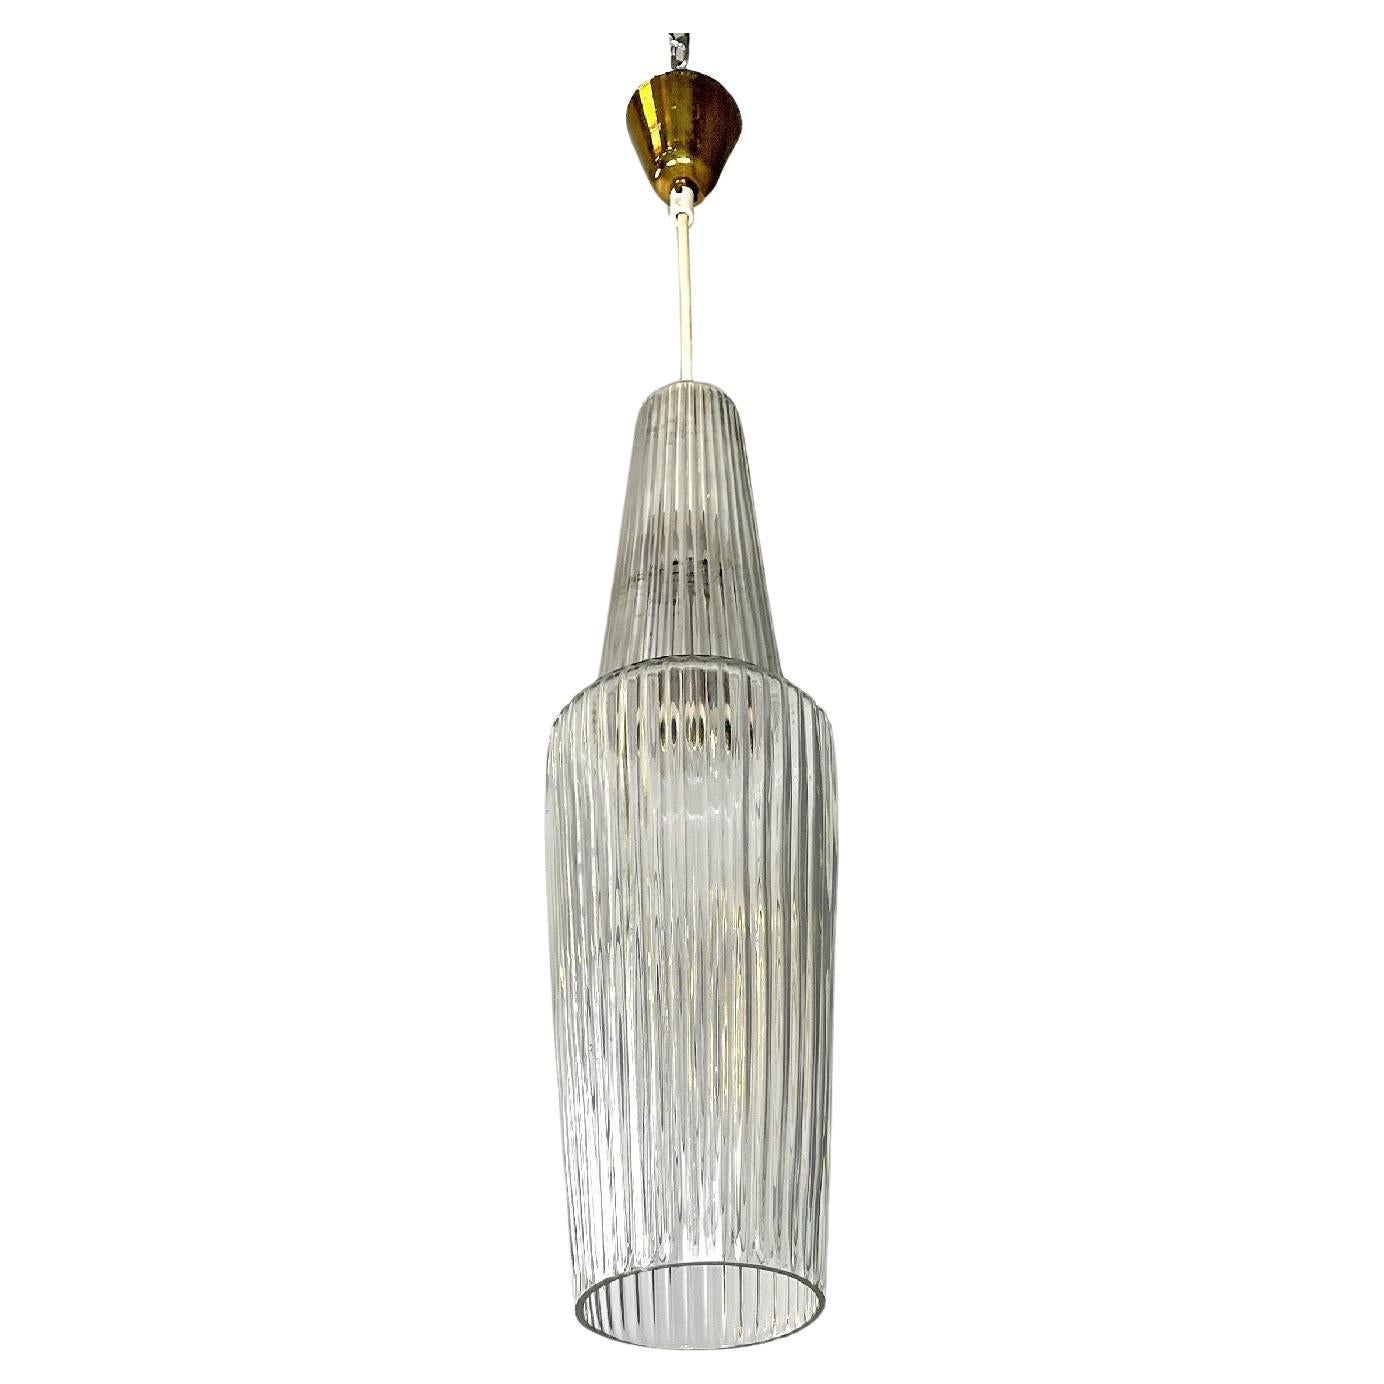 Italian mid-century modern golden plastic and fluted glass chandelier, 1950s